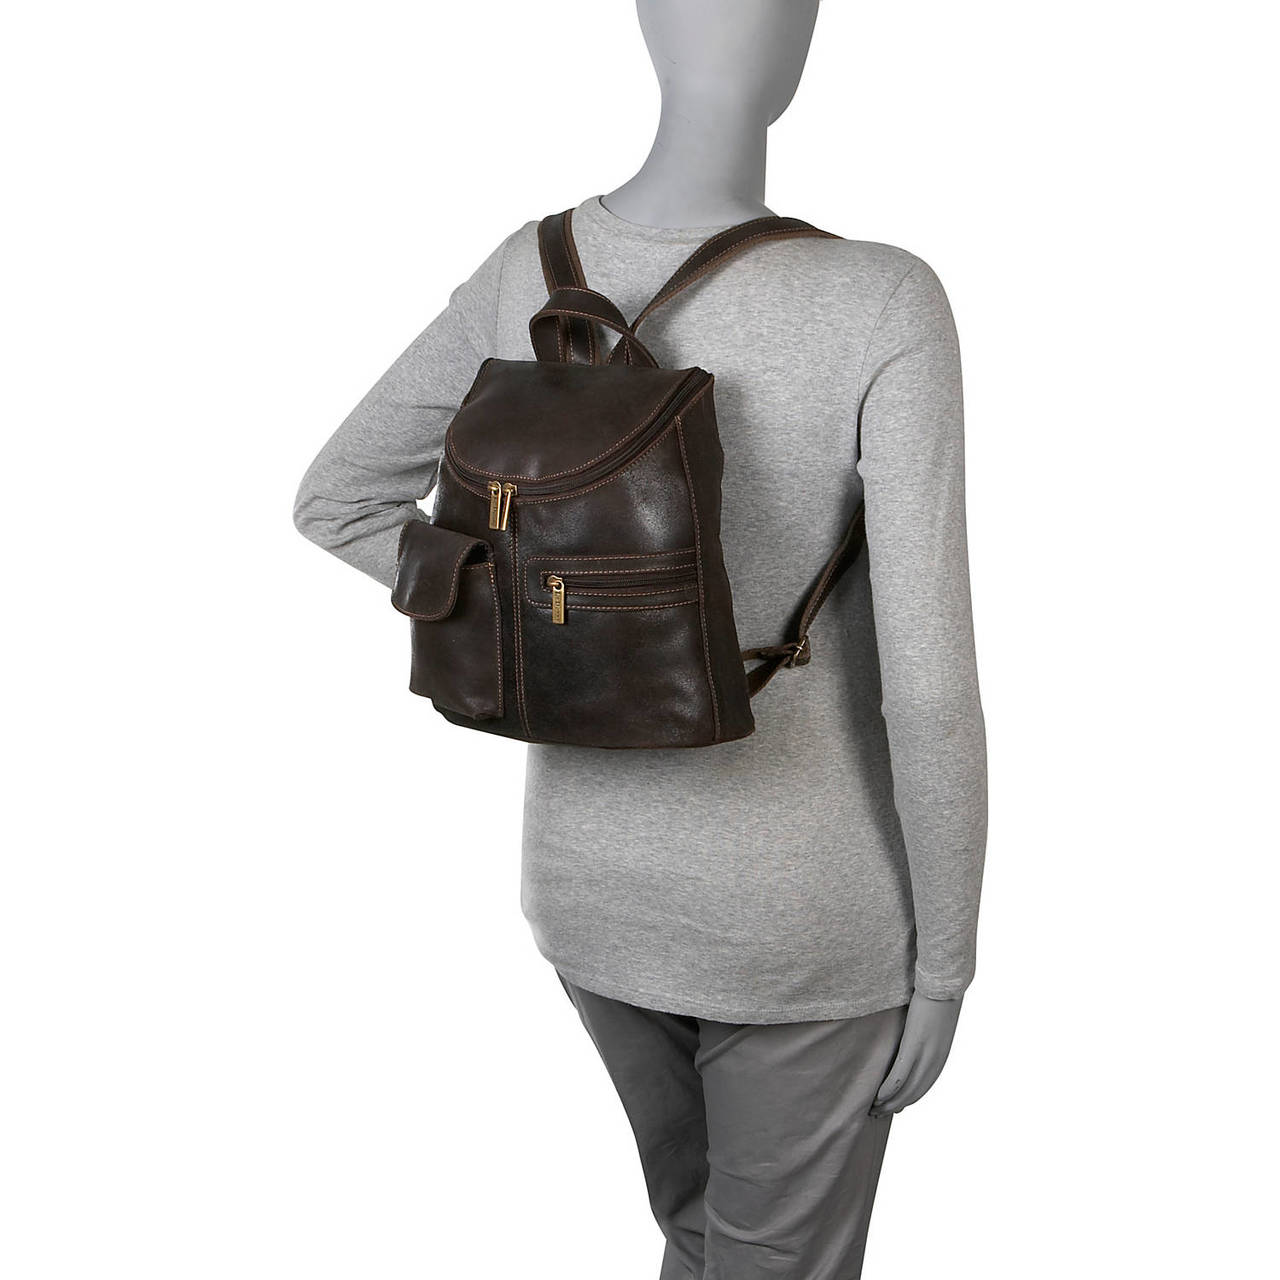 Le Donne Leather Distressed Leather Womens Back Pack/Purse DS-9109 - image 4 of 4